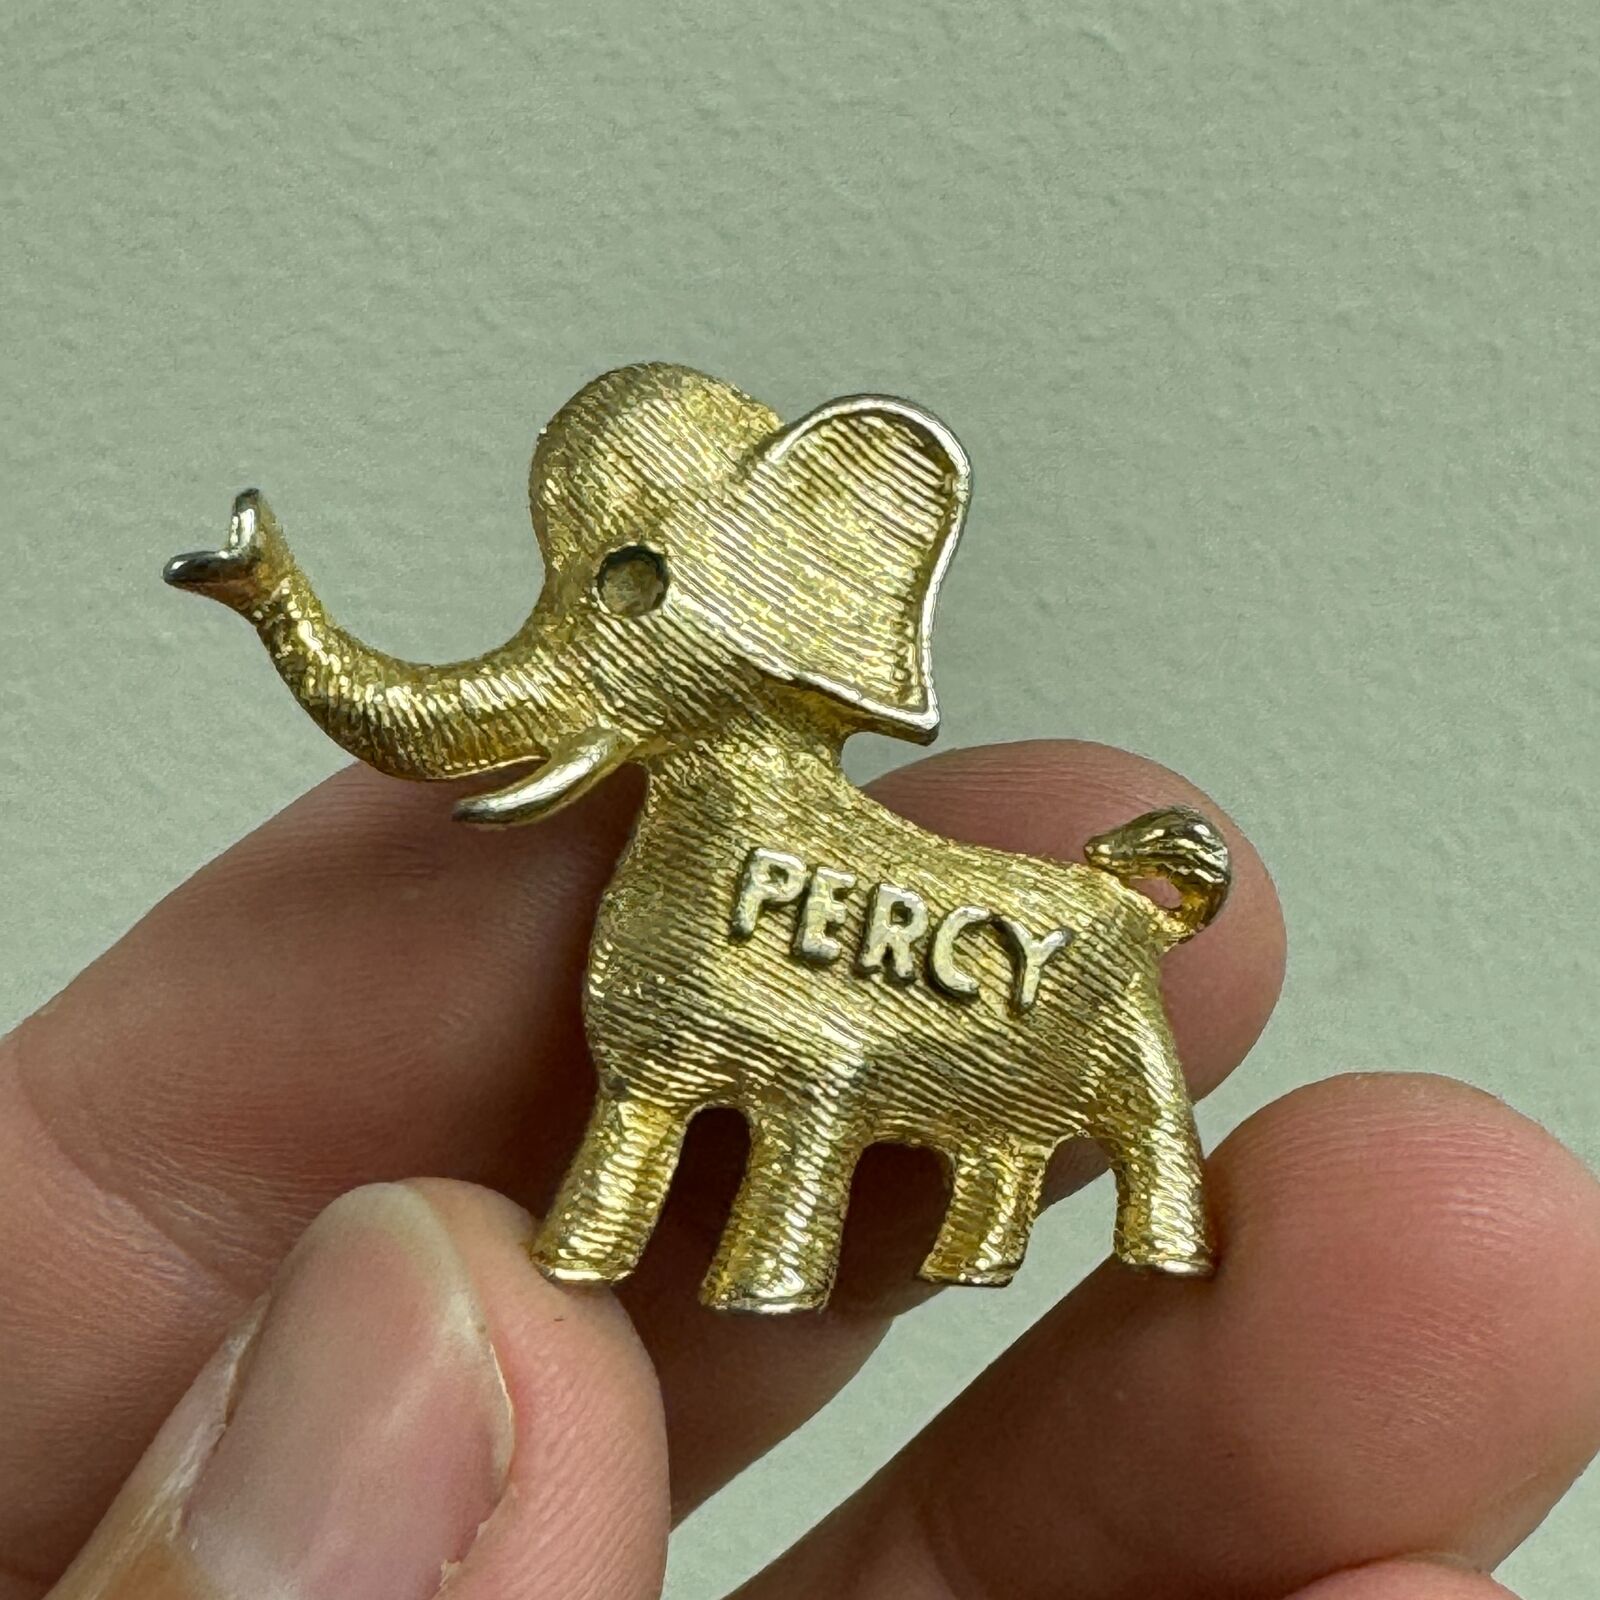 VTG c.1960s Charles Percy Illinois Governor Pin Gold-Tone Elephant Republican